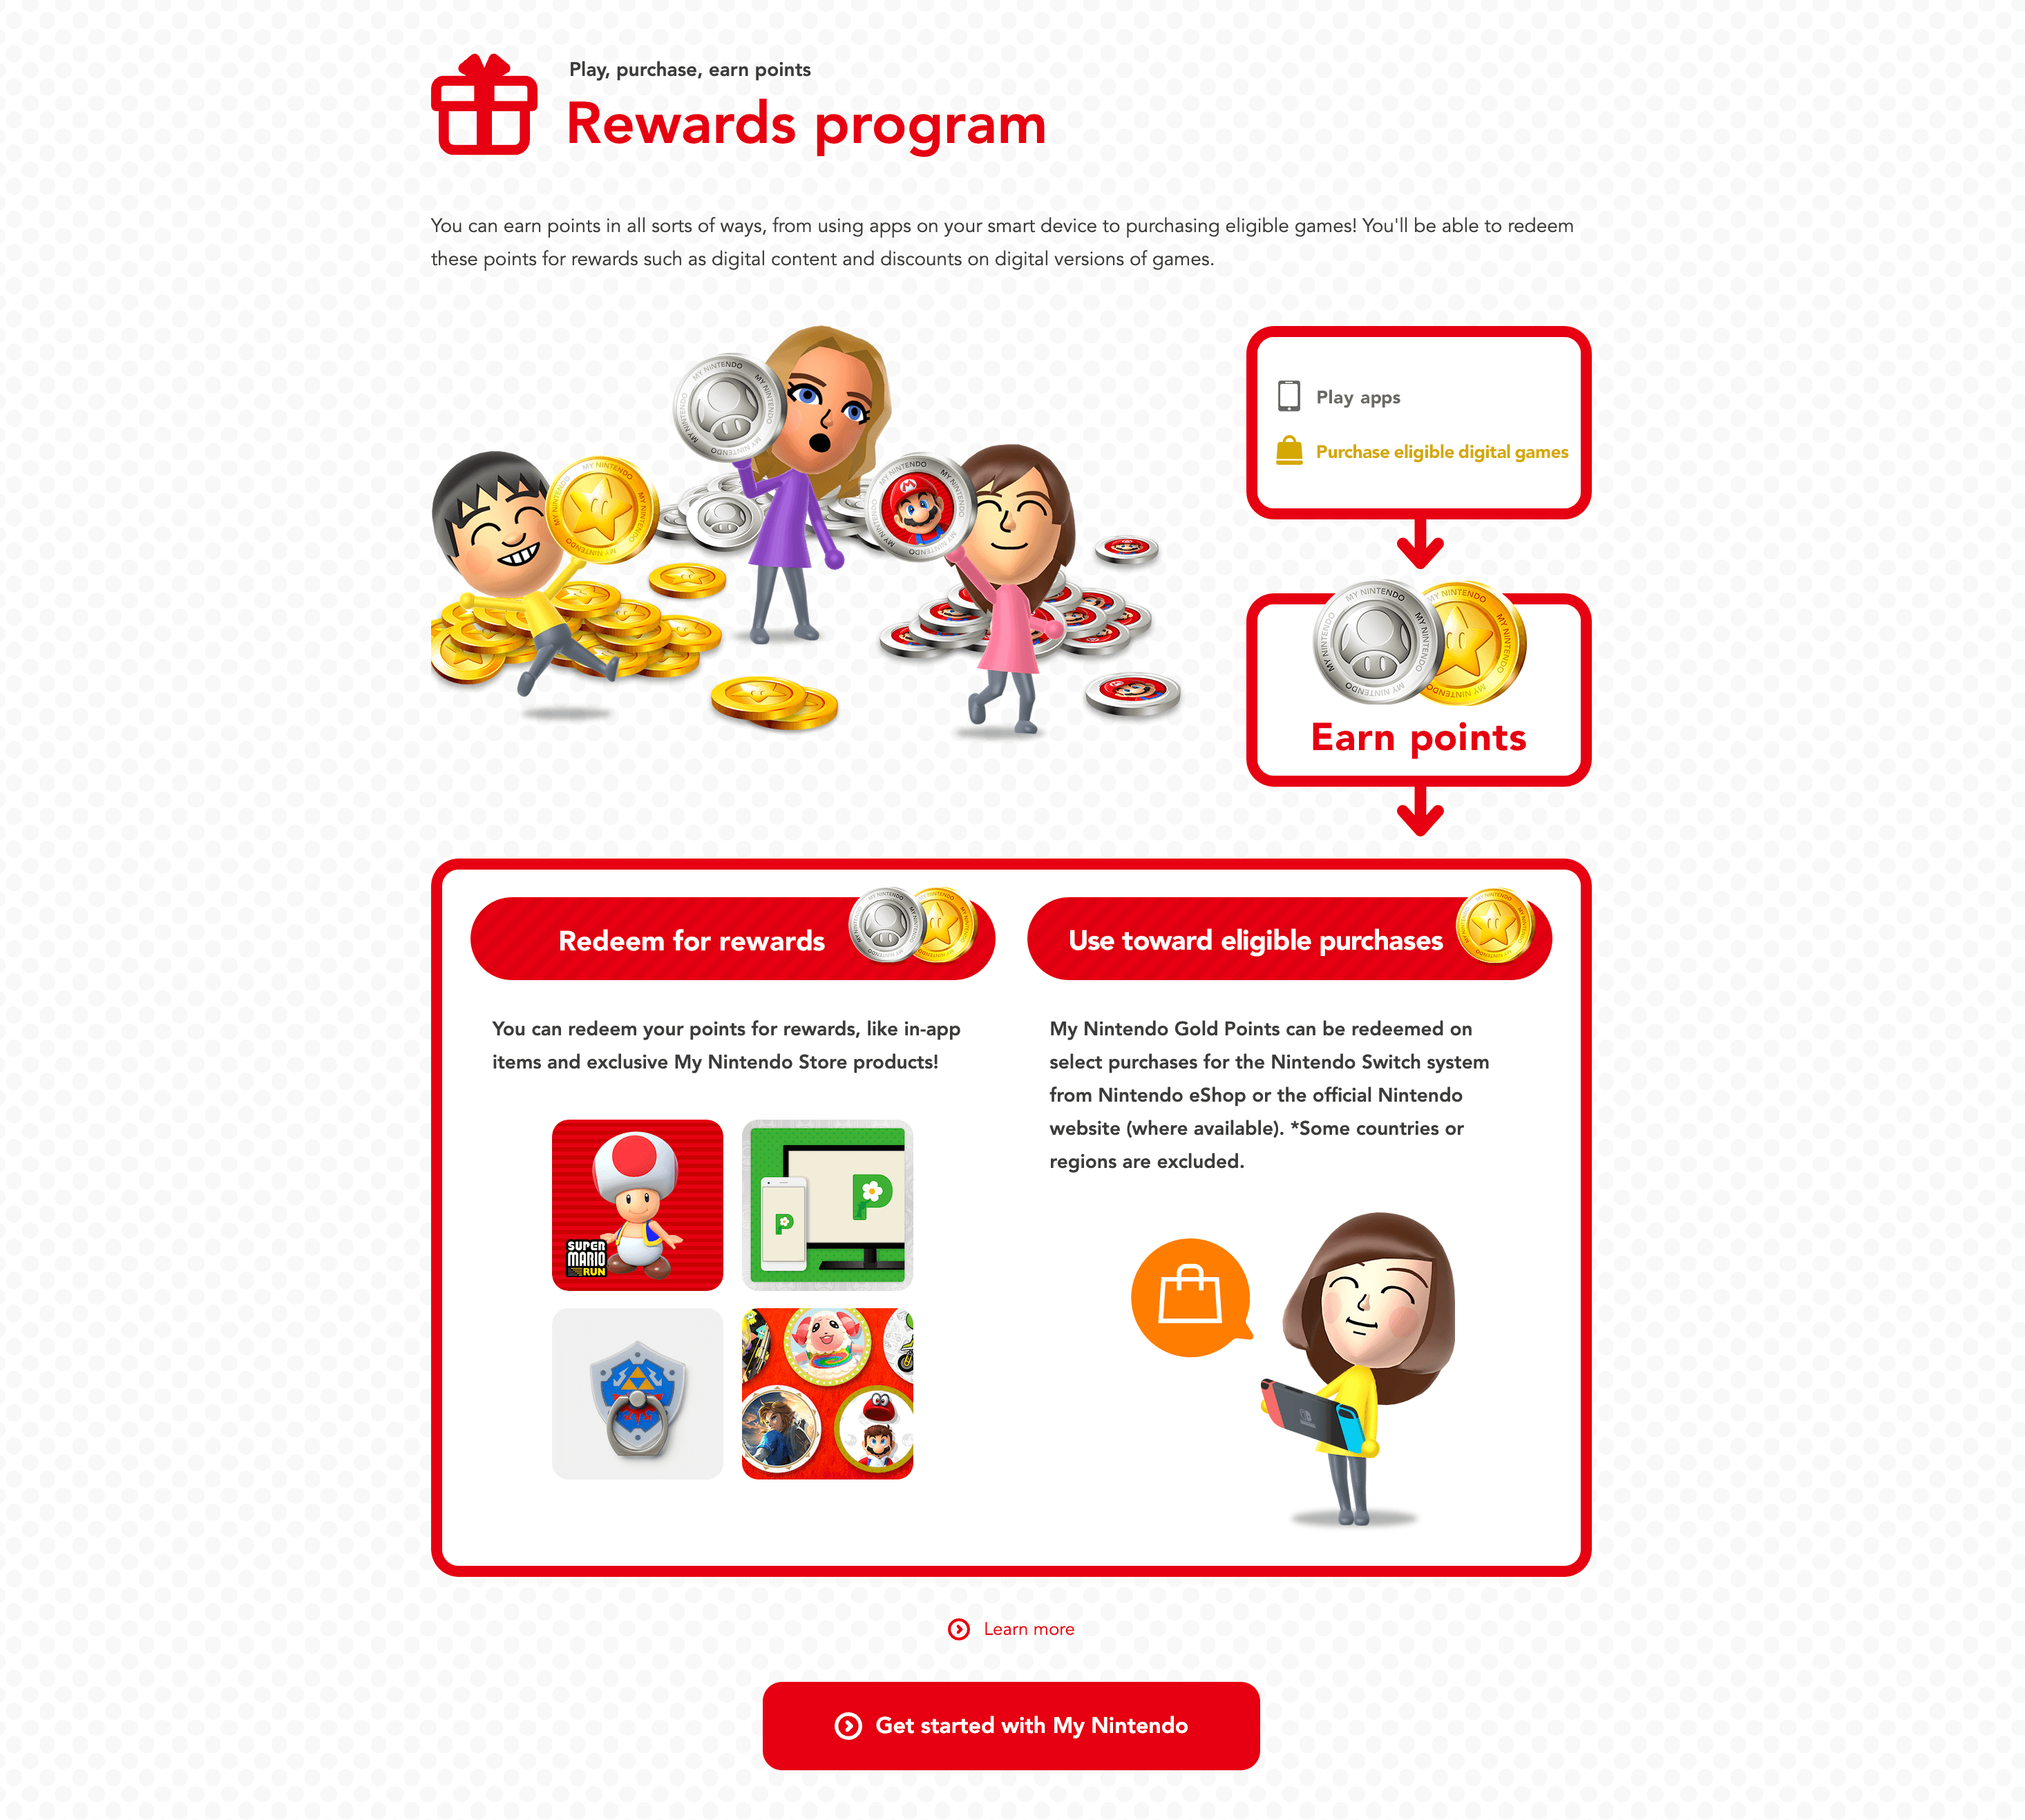 A screenshot from the My Nintendo’s Rewards program explainer page showing branded icons demonstrating how to earn points, redeem rewards, or use points towards eligible purchases.